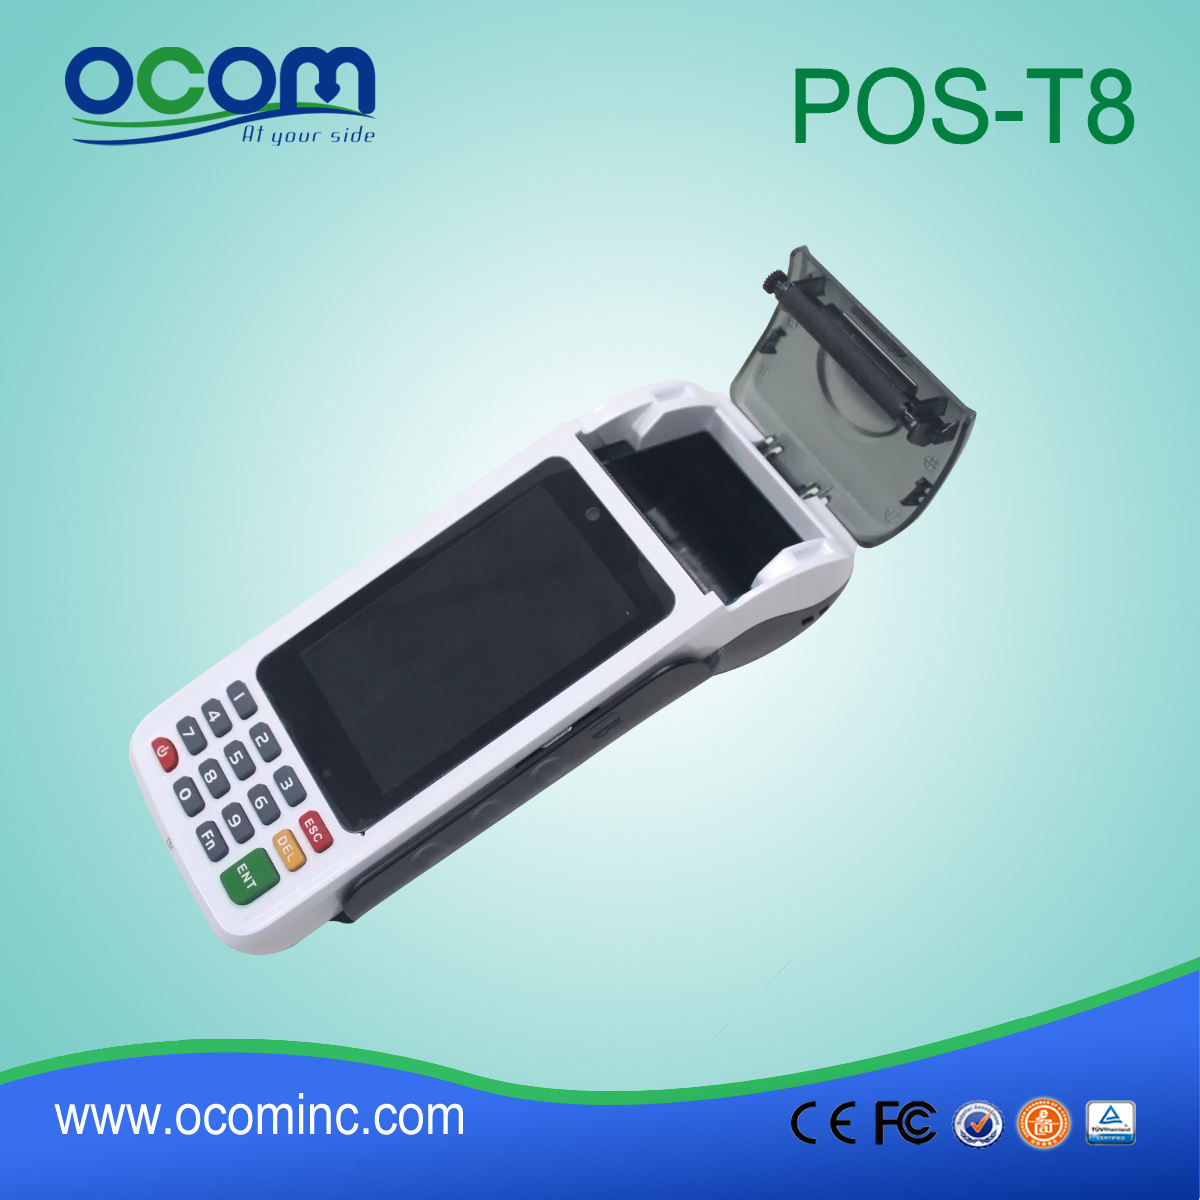 Handheld Android Pos Terminal POS System (POS-T8)